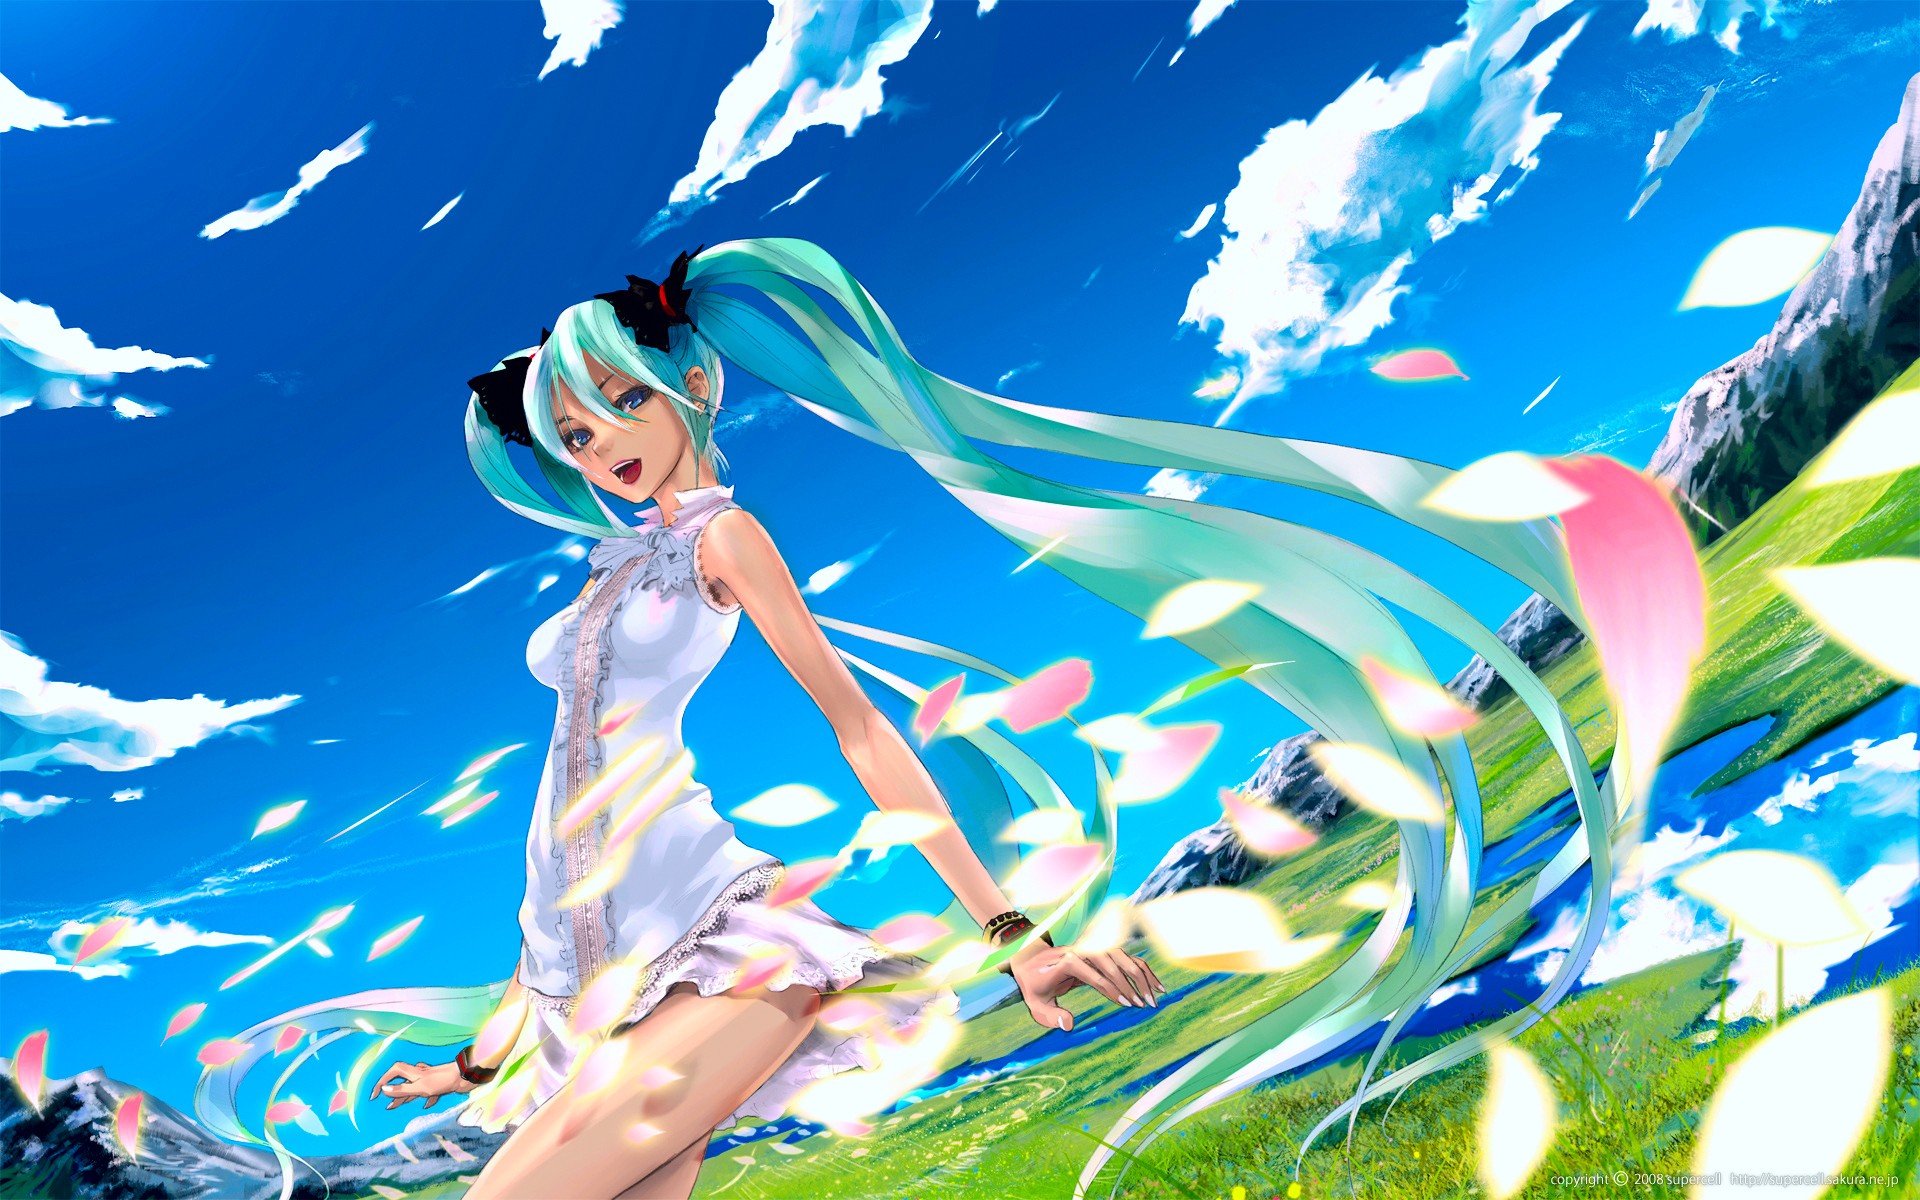 water, Mountains, Clouds, Landscapes, Nature, Vocaloid, Dress, Hatsune, Miku, Blue, Eyes, Meadows, Long, Hair, Green, Hair, Twintails, Scenic, Flower, Petals, White, Dress, Redjuice, Skyscapes, Reflections, Blue Wallpaper